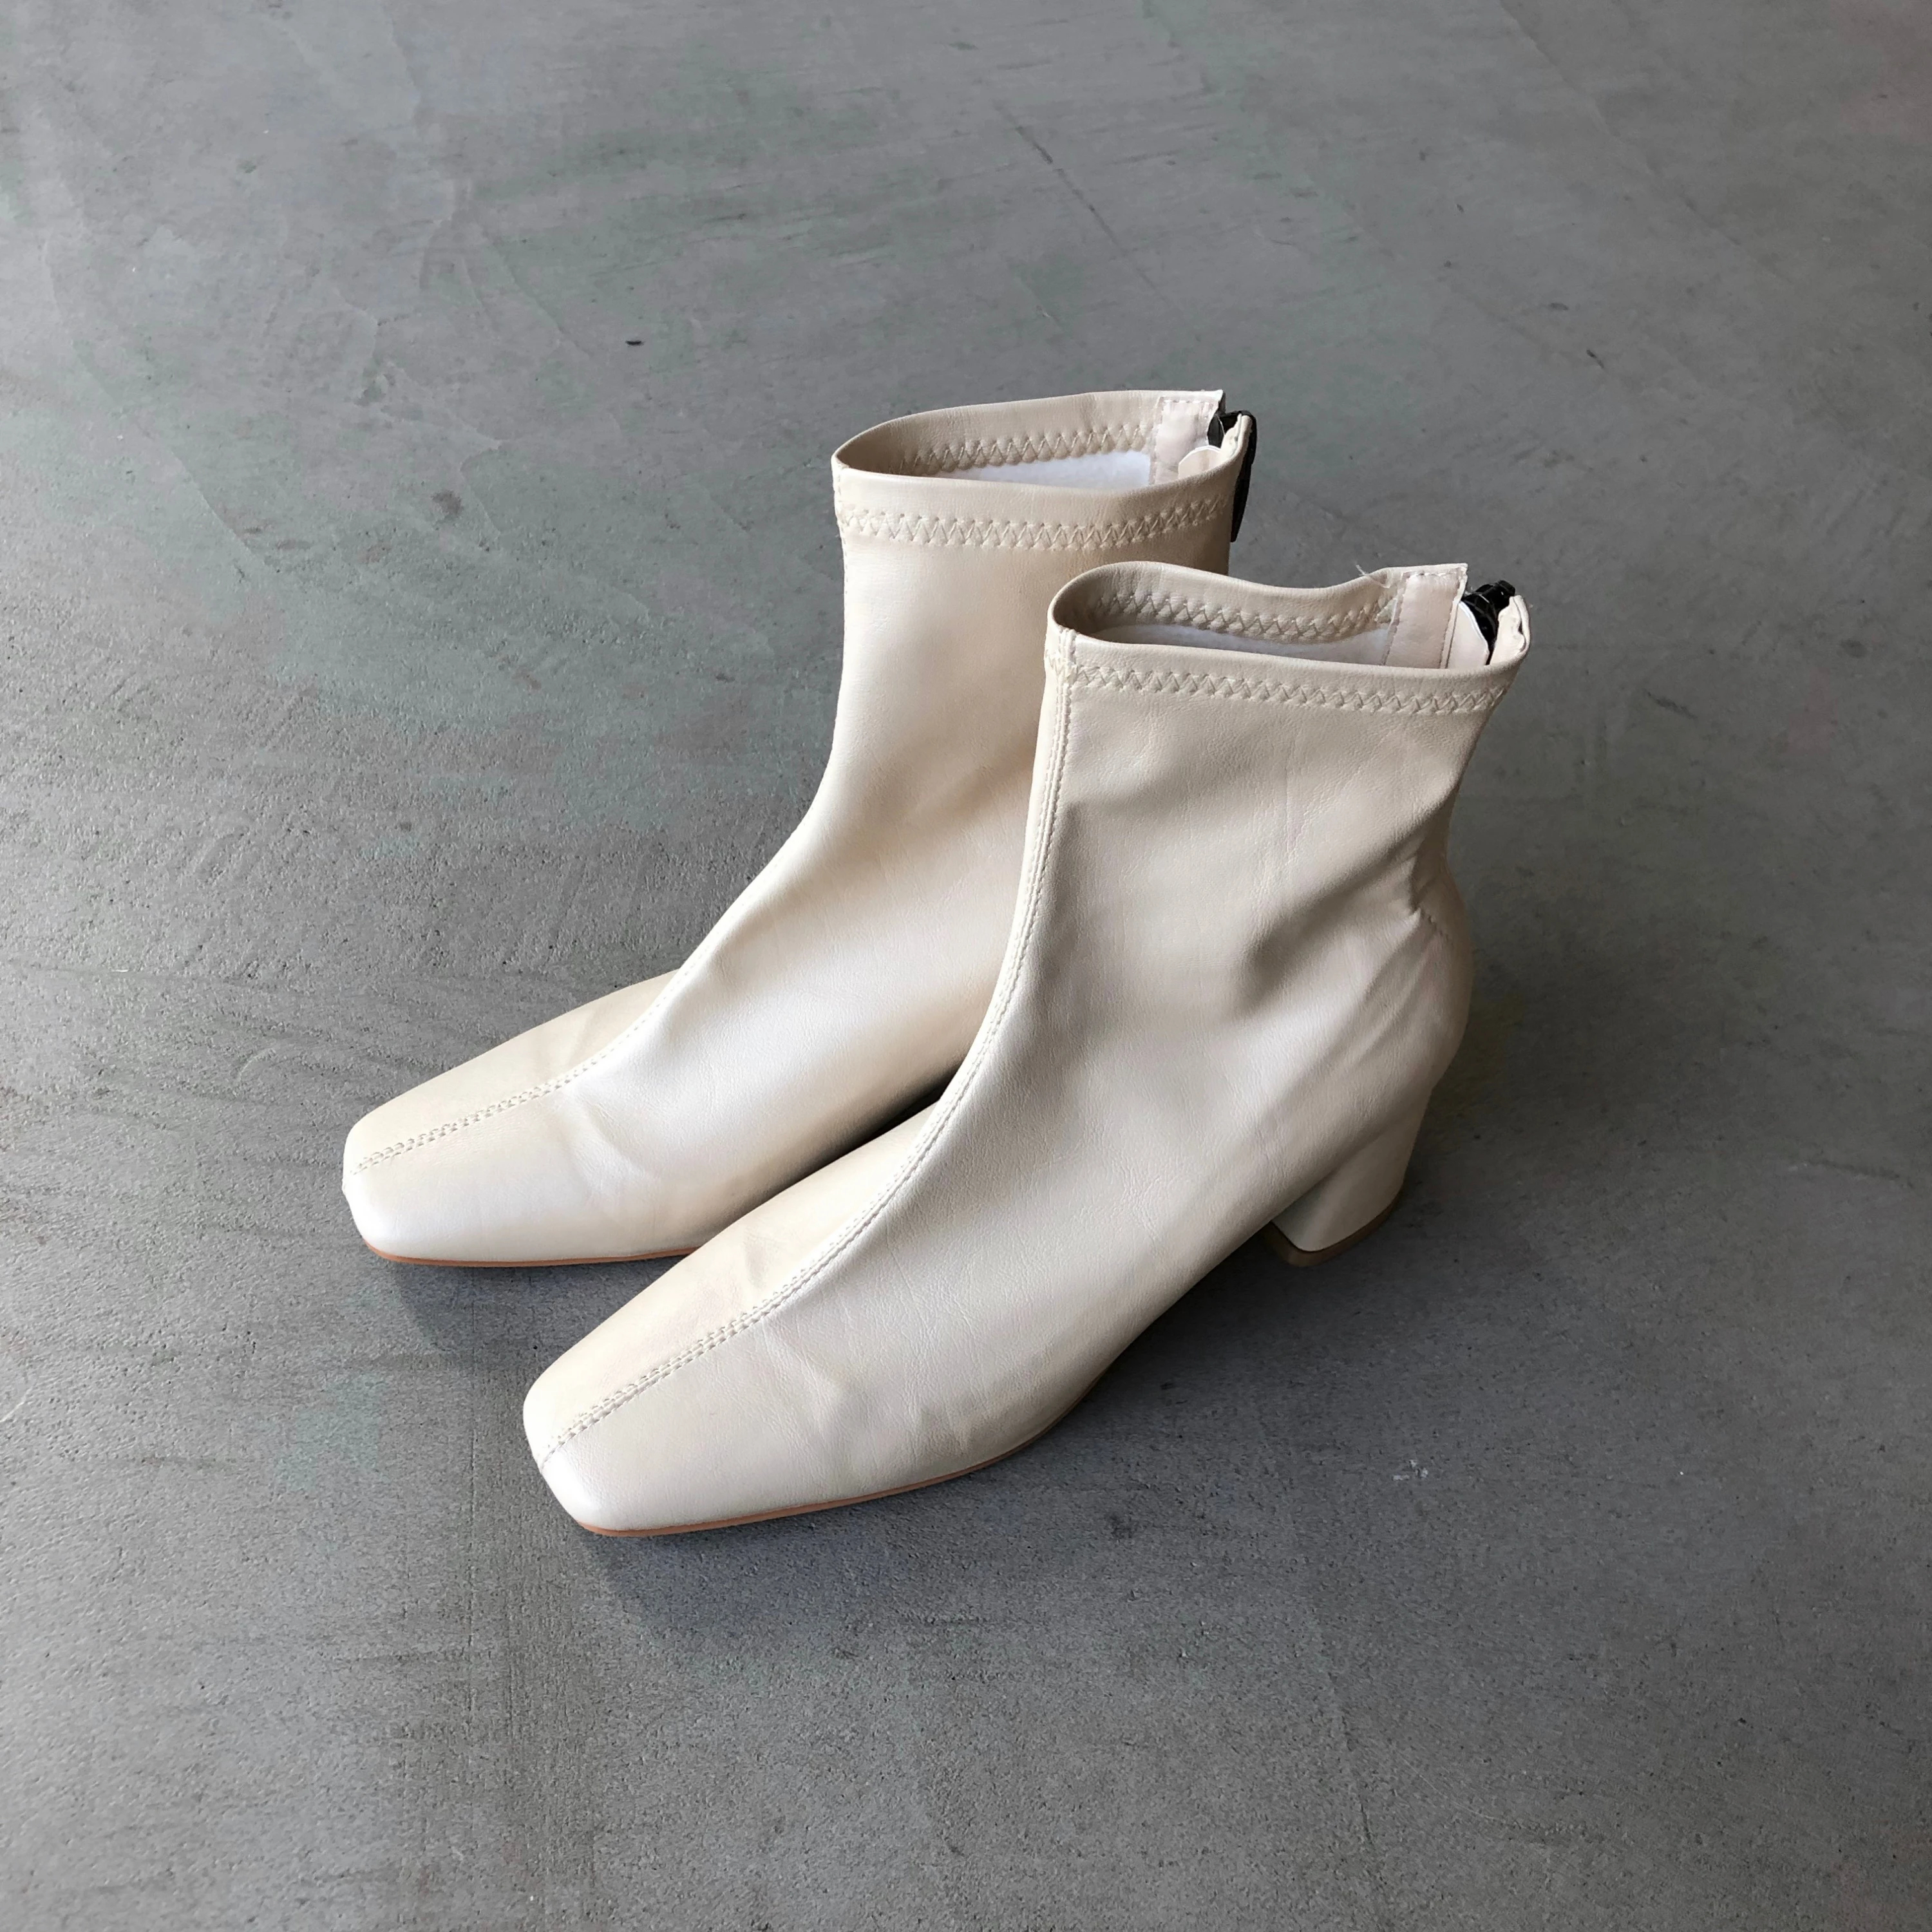 clouchy leather square toxu boots / willfully（ウィルフリー）の ...